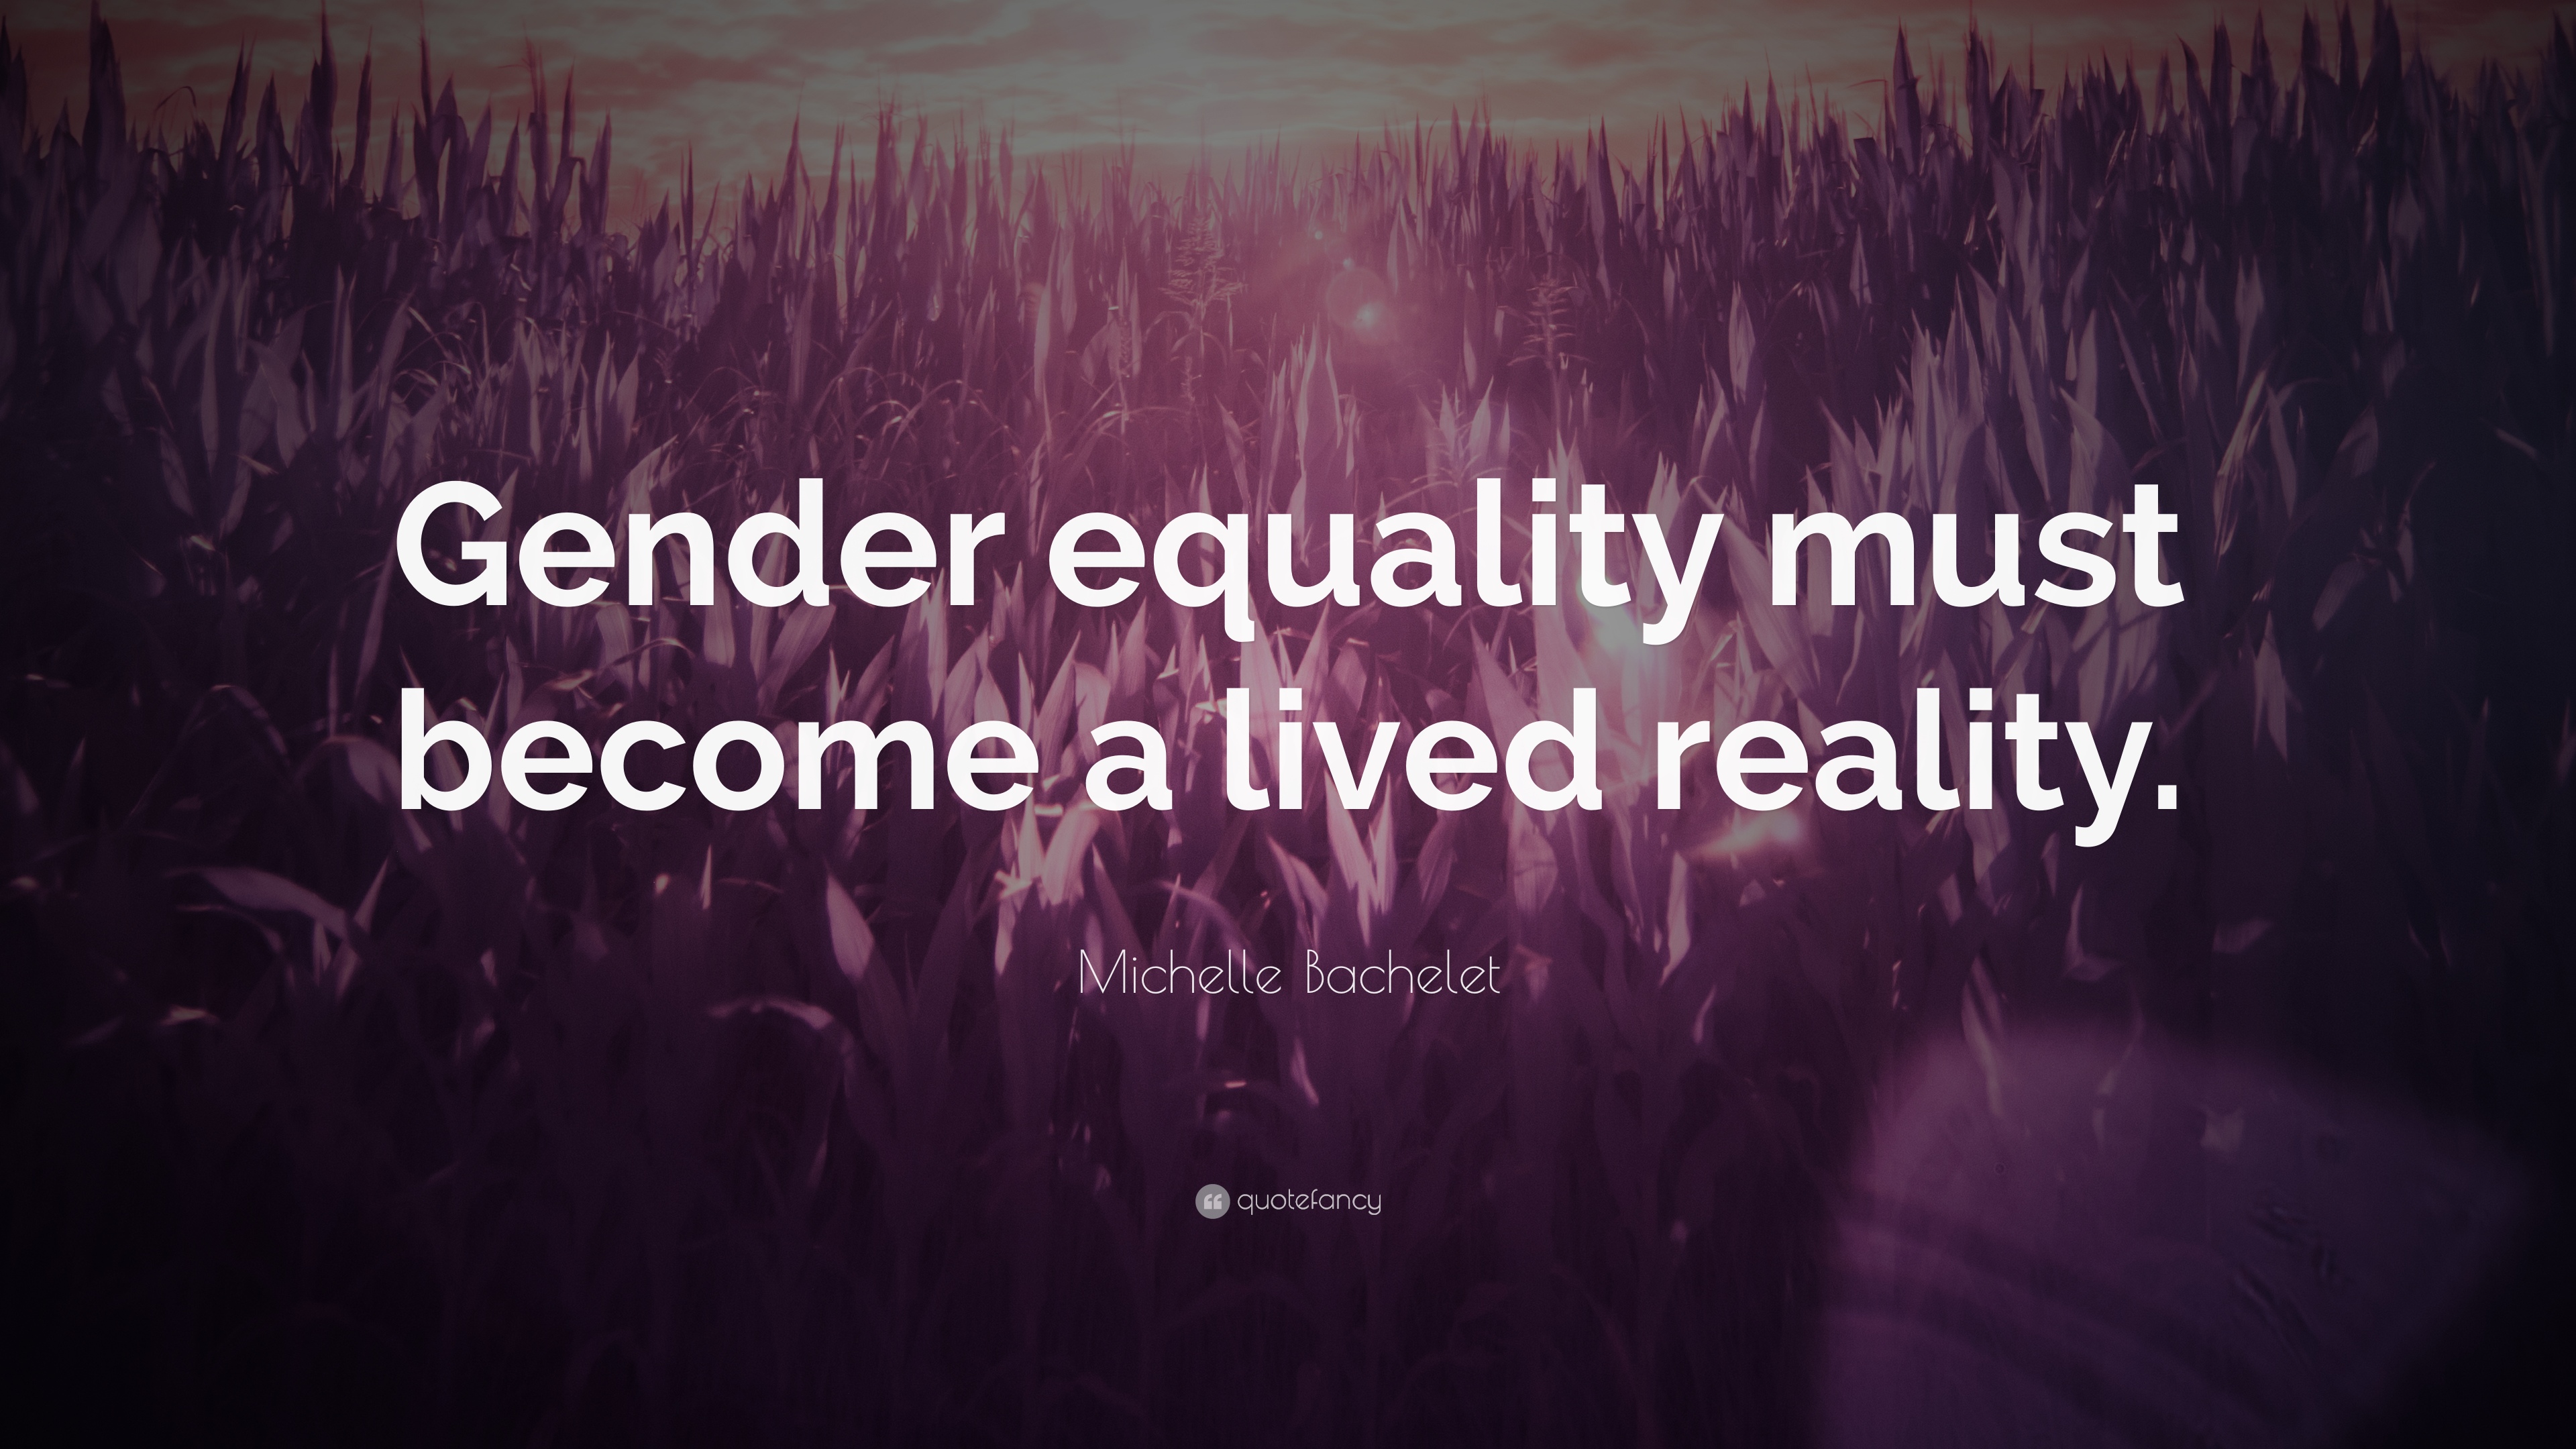 Michelle Bachelet Quote: “Gender equality must become a lived reality.”